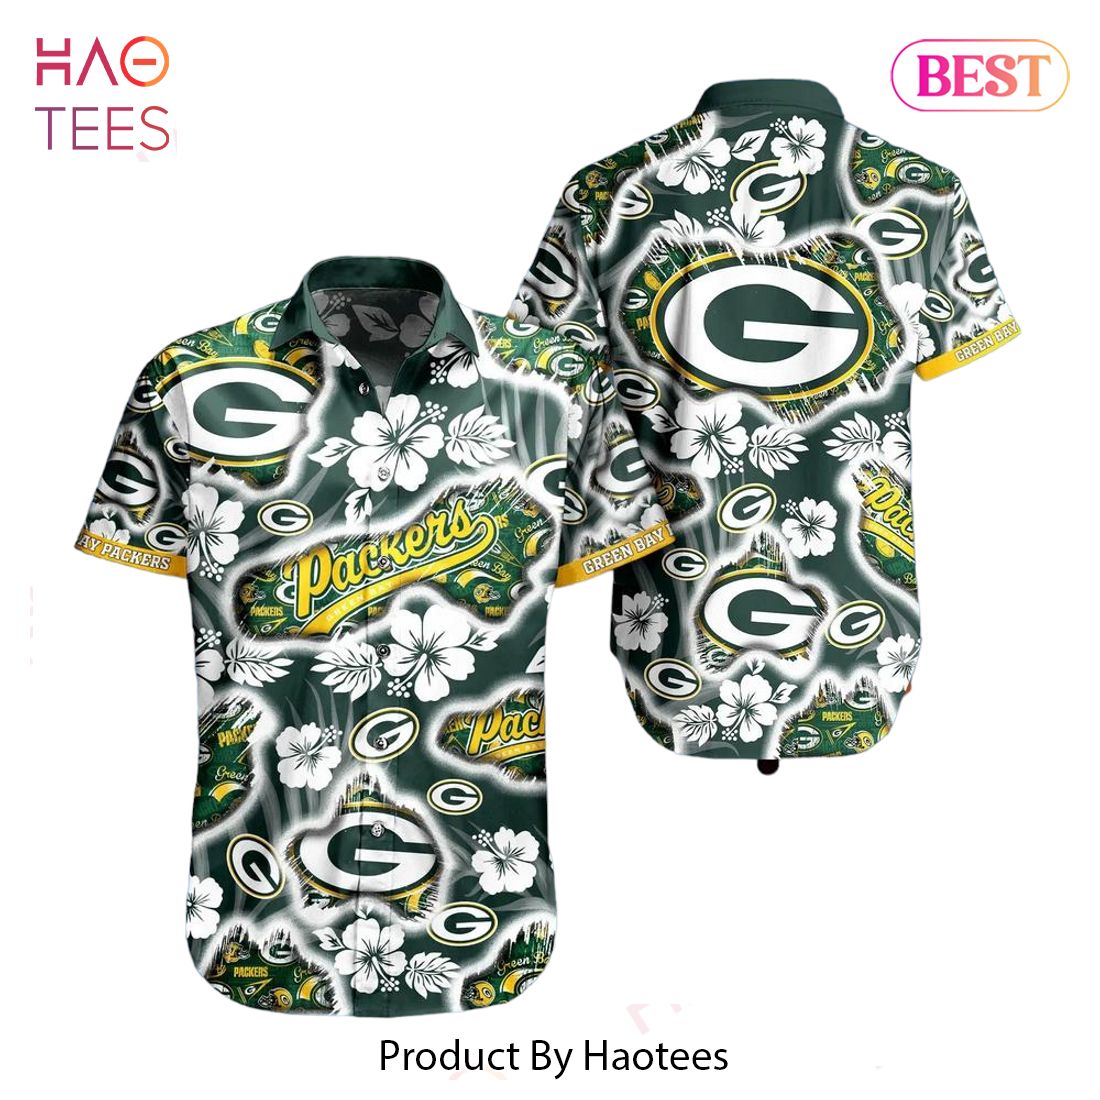 HOT TREND Green Bay Packers Nfl Hawaii Shirt Graphic Floral Printed This Summer Beach Shirt For Fans